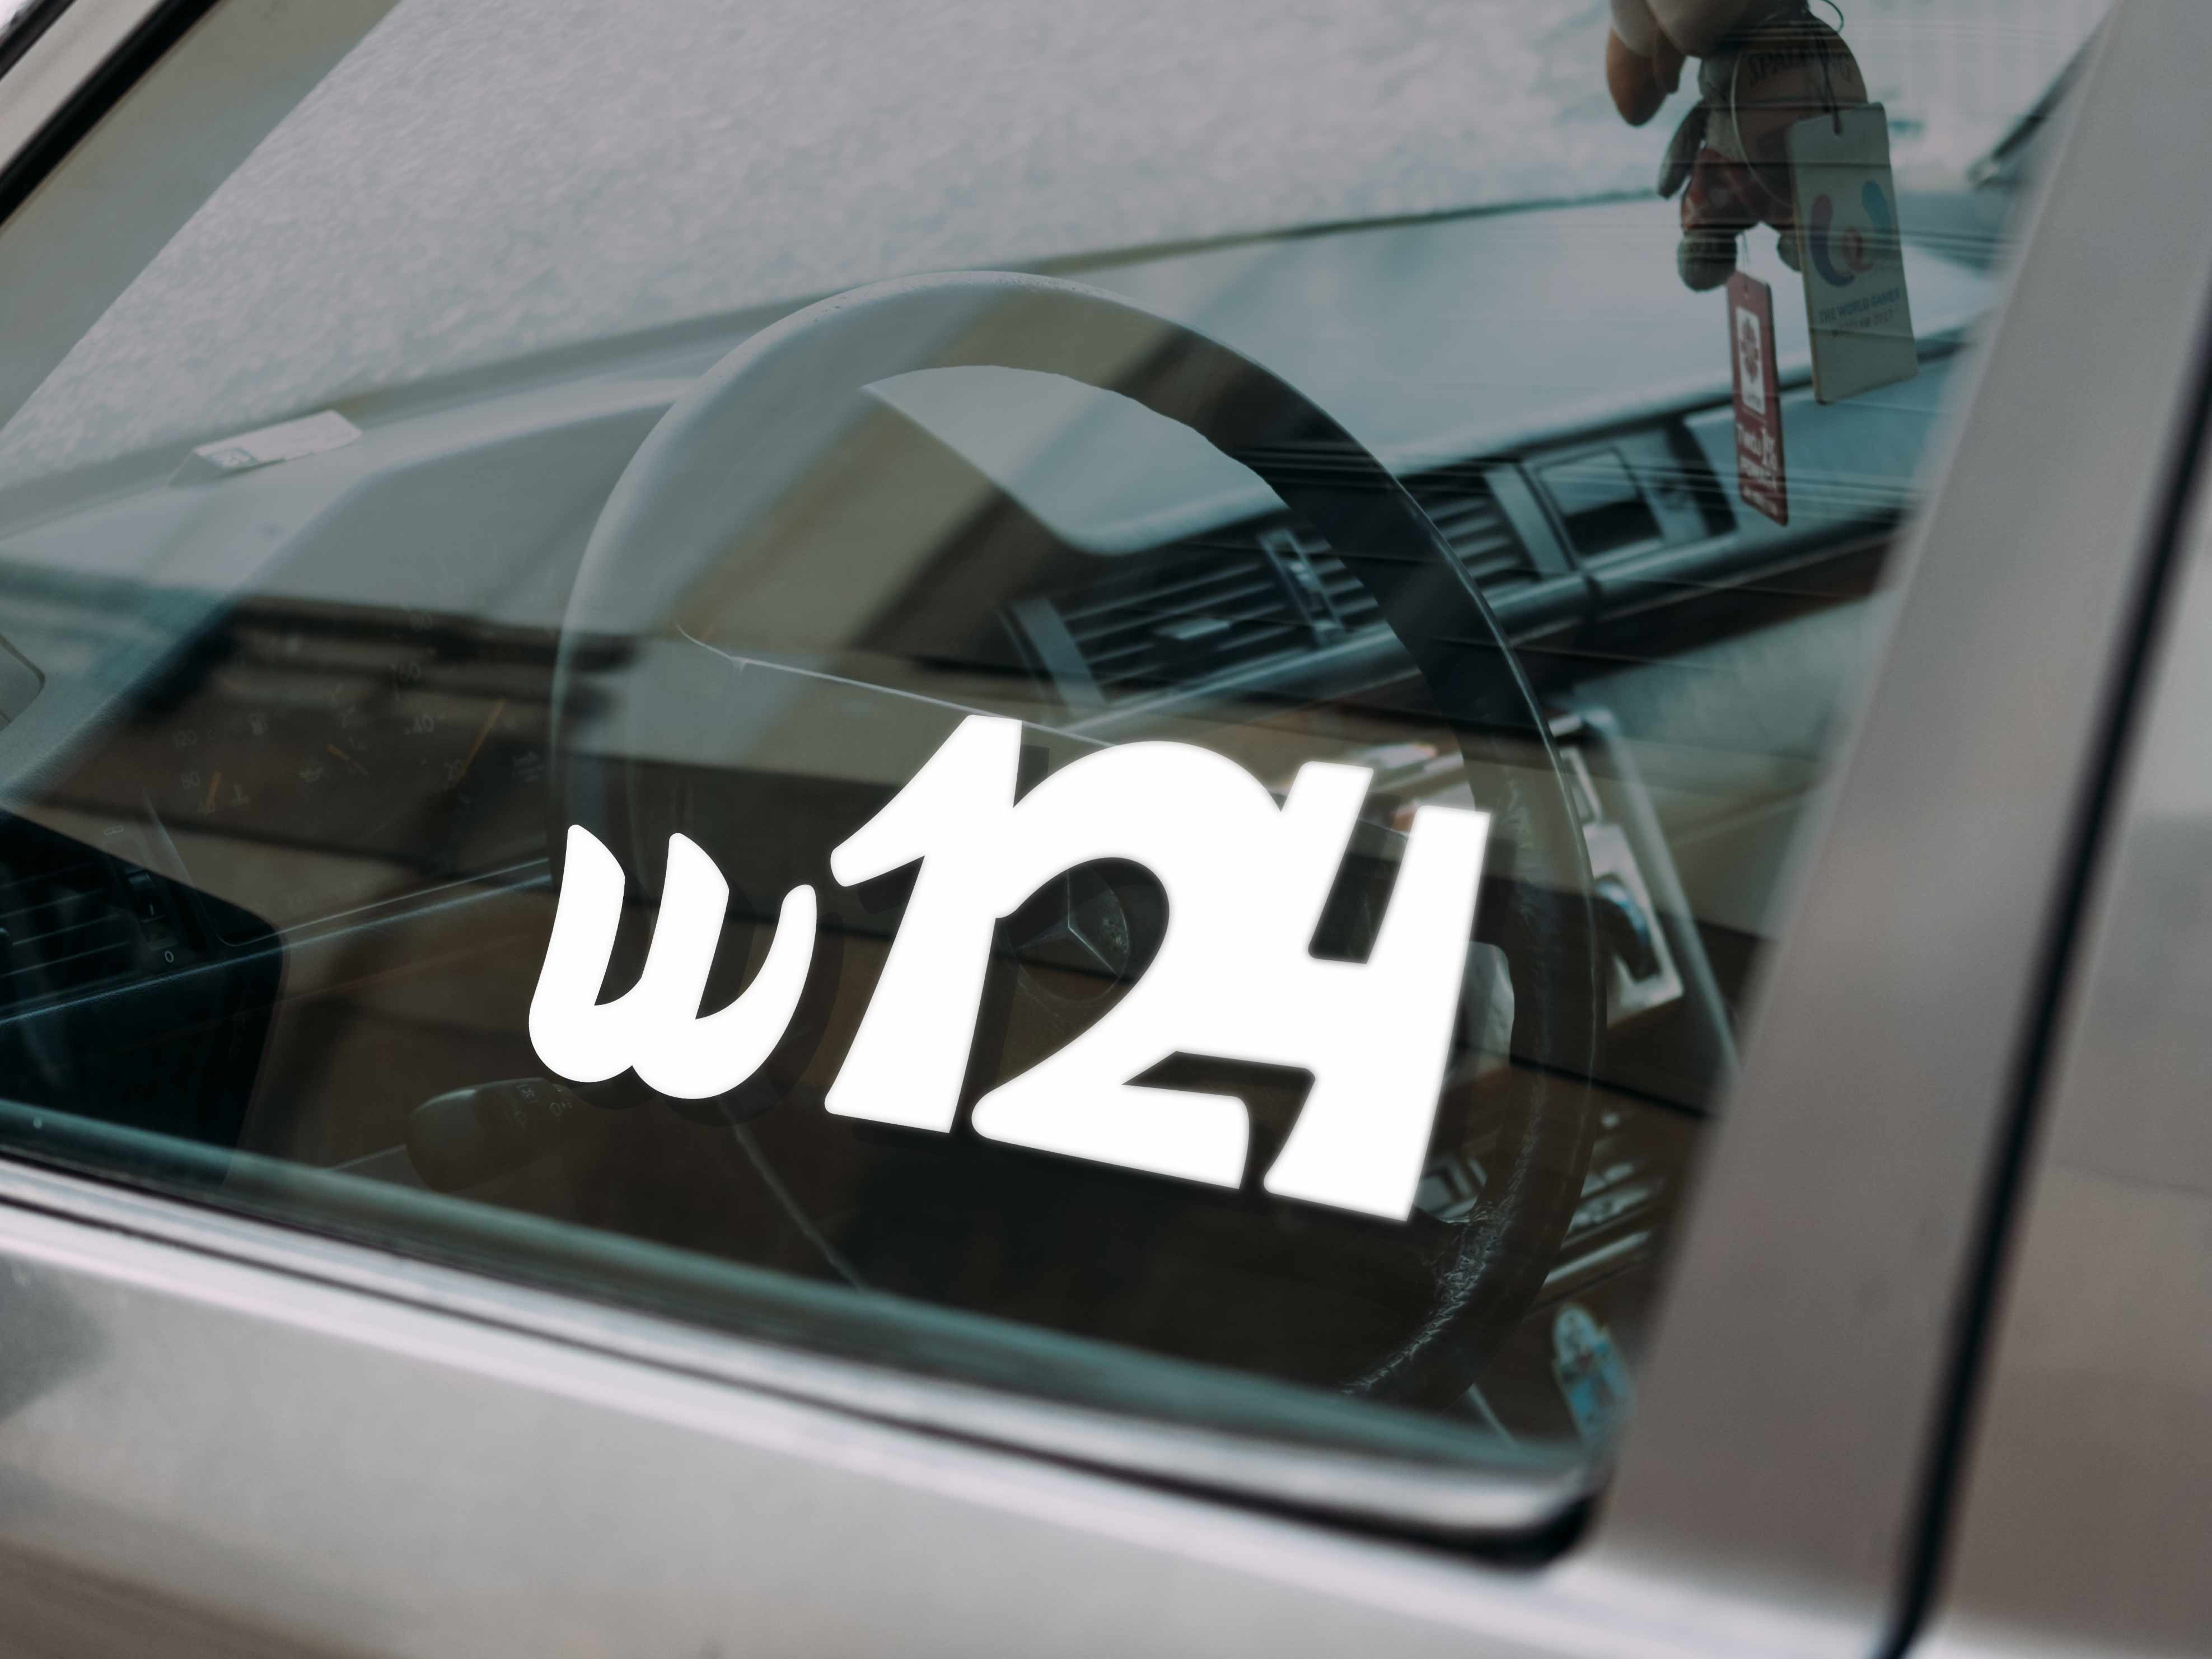 Window sticker for Mercedes-Benz W124. Available in different colors. Contour cut from premium outdoor vinyls. Never fades out.